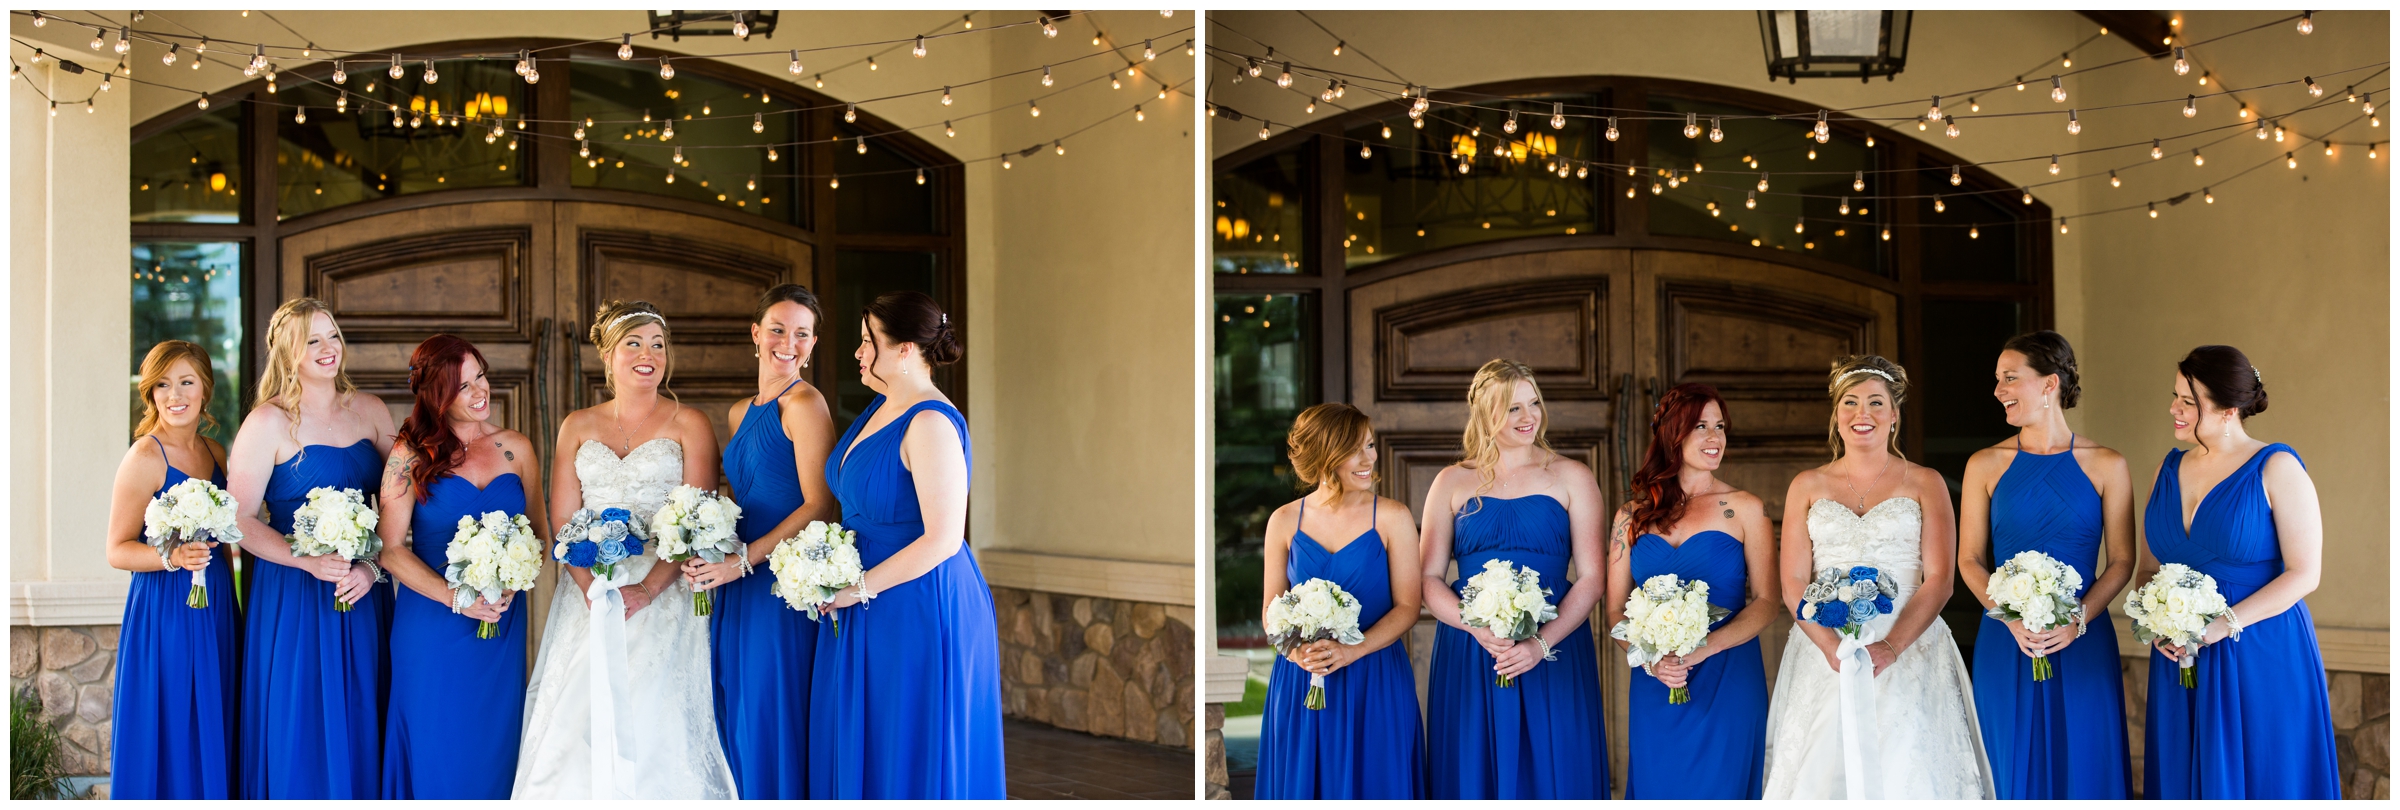 bridesmaids in royal blue dresses posing in front of wooden doors at The Pinery wedding 